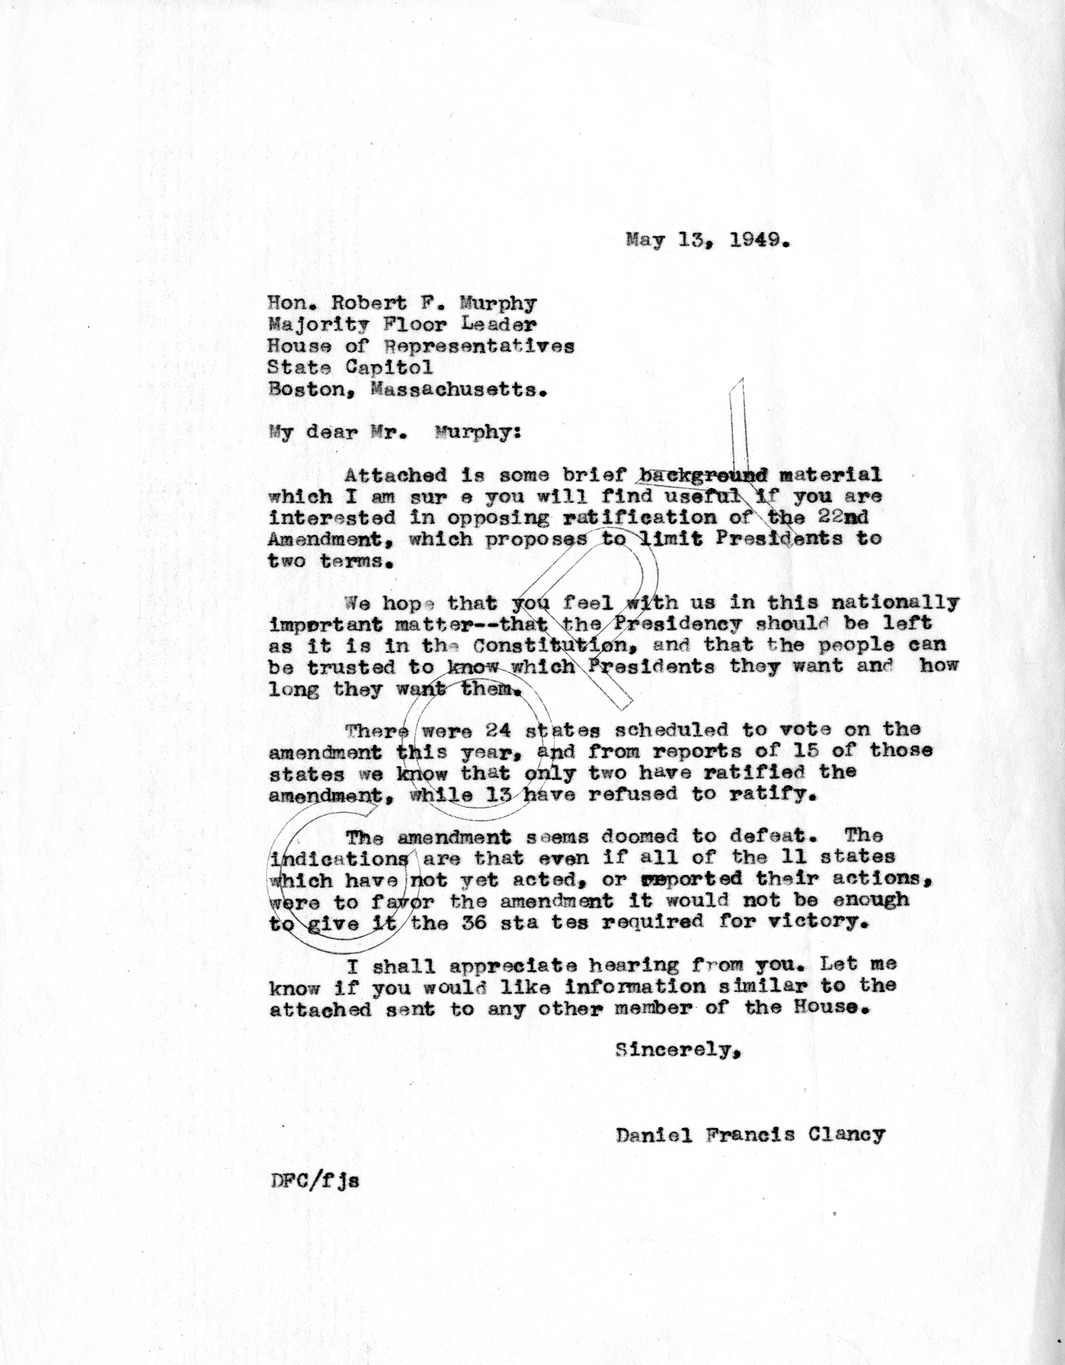 Letter from Daniel F. Clancy to Robert F. Murphy